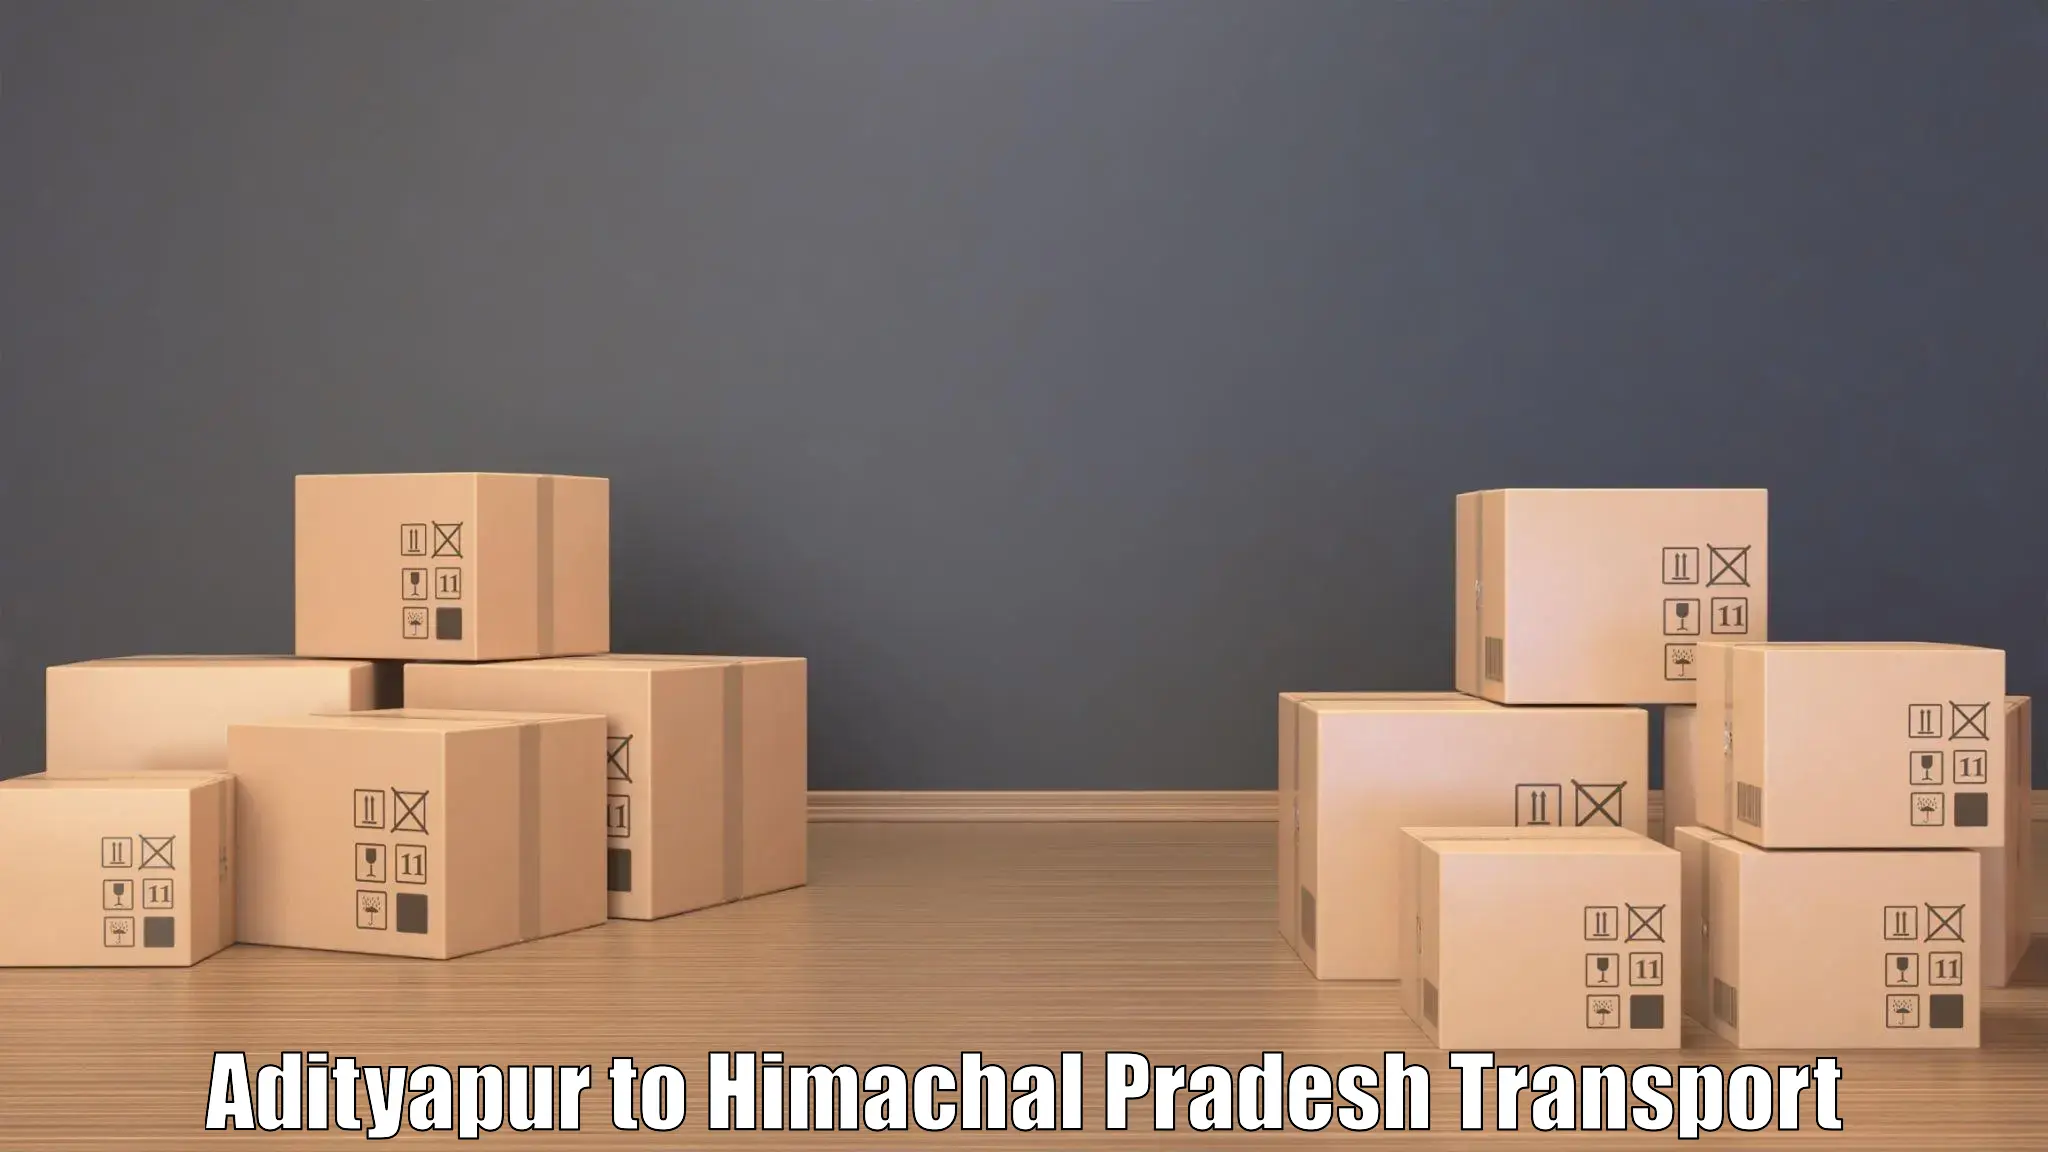 Truck transport companies in India Adityapur to Chachyot